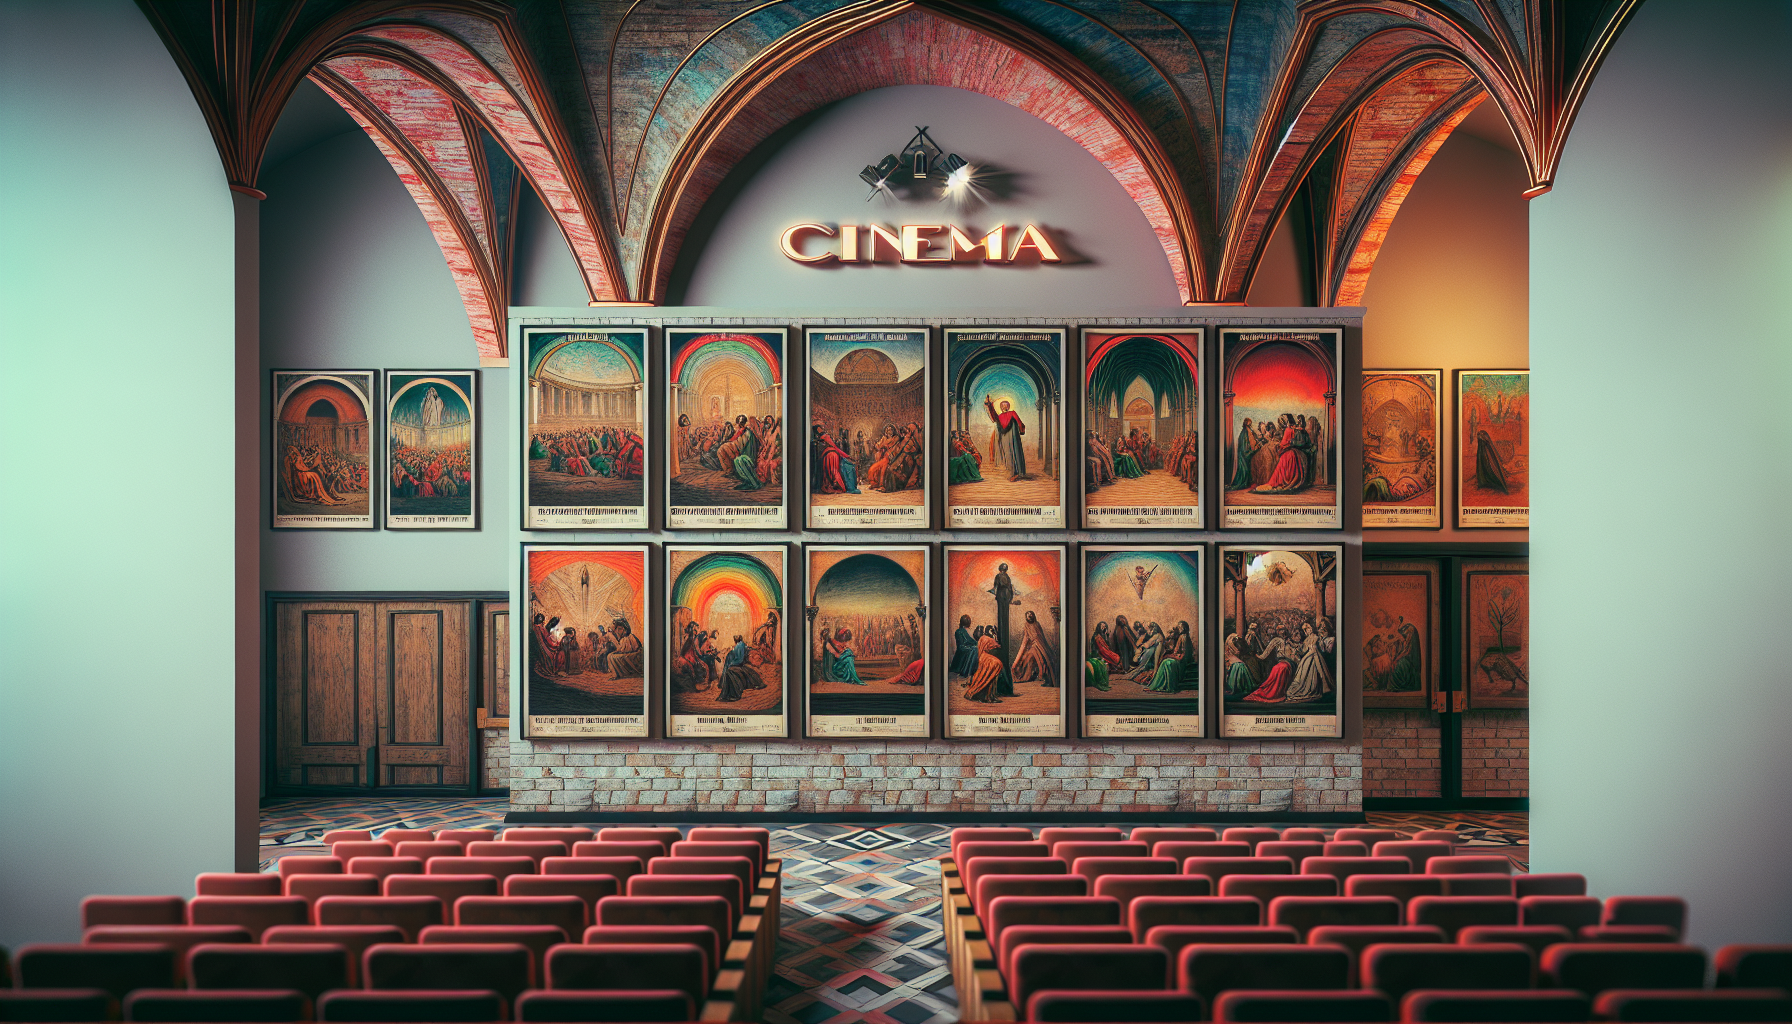 Artistic depiction of an old-fashioned cinema lobby with posters displaying ten different interpretations of Jesus Christ's life, each in a unique art style, ranging from classical to modern, reflecti